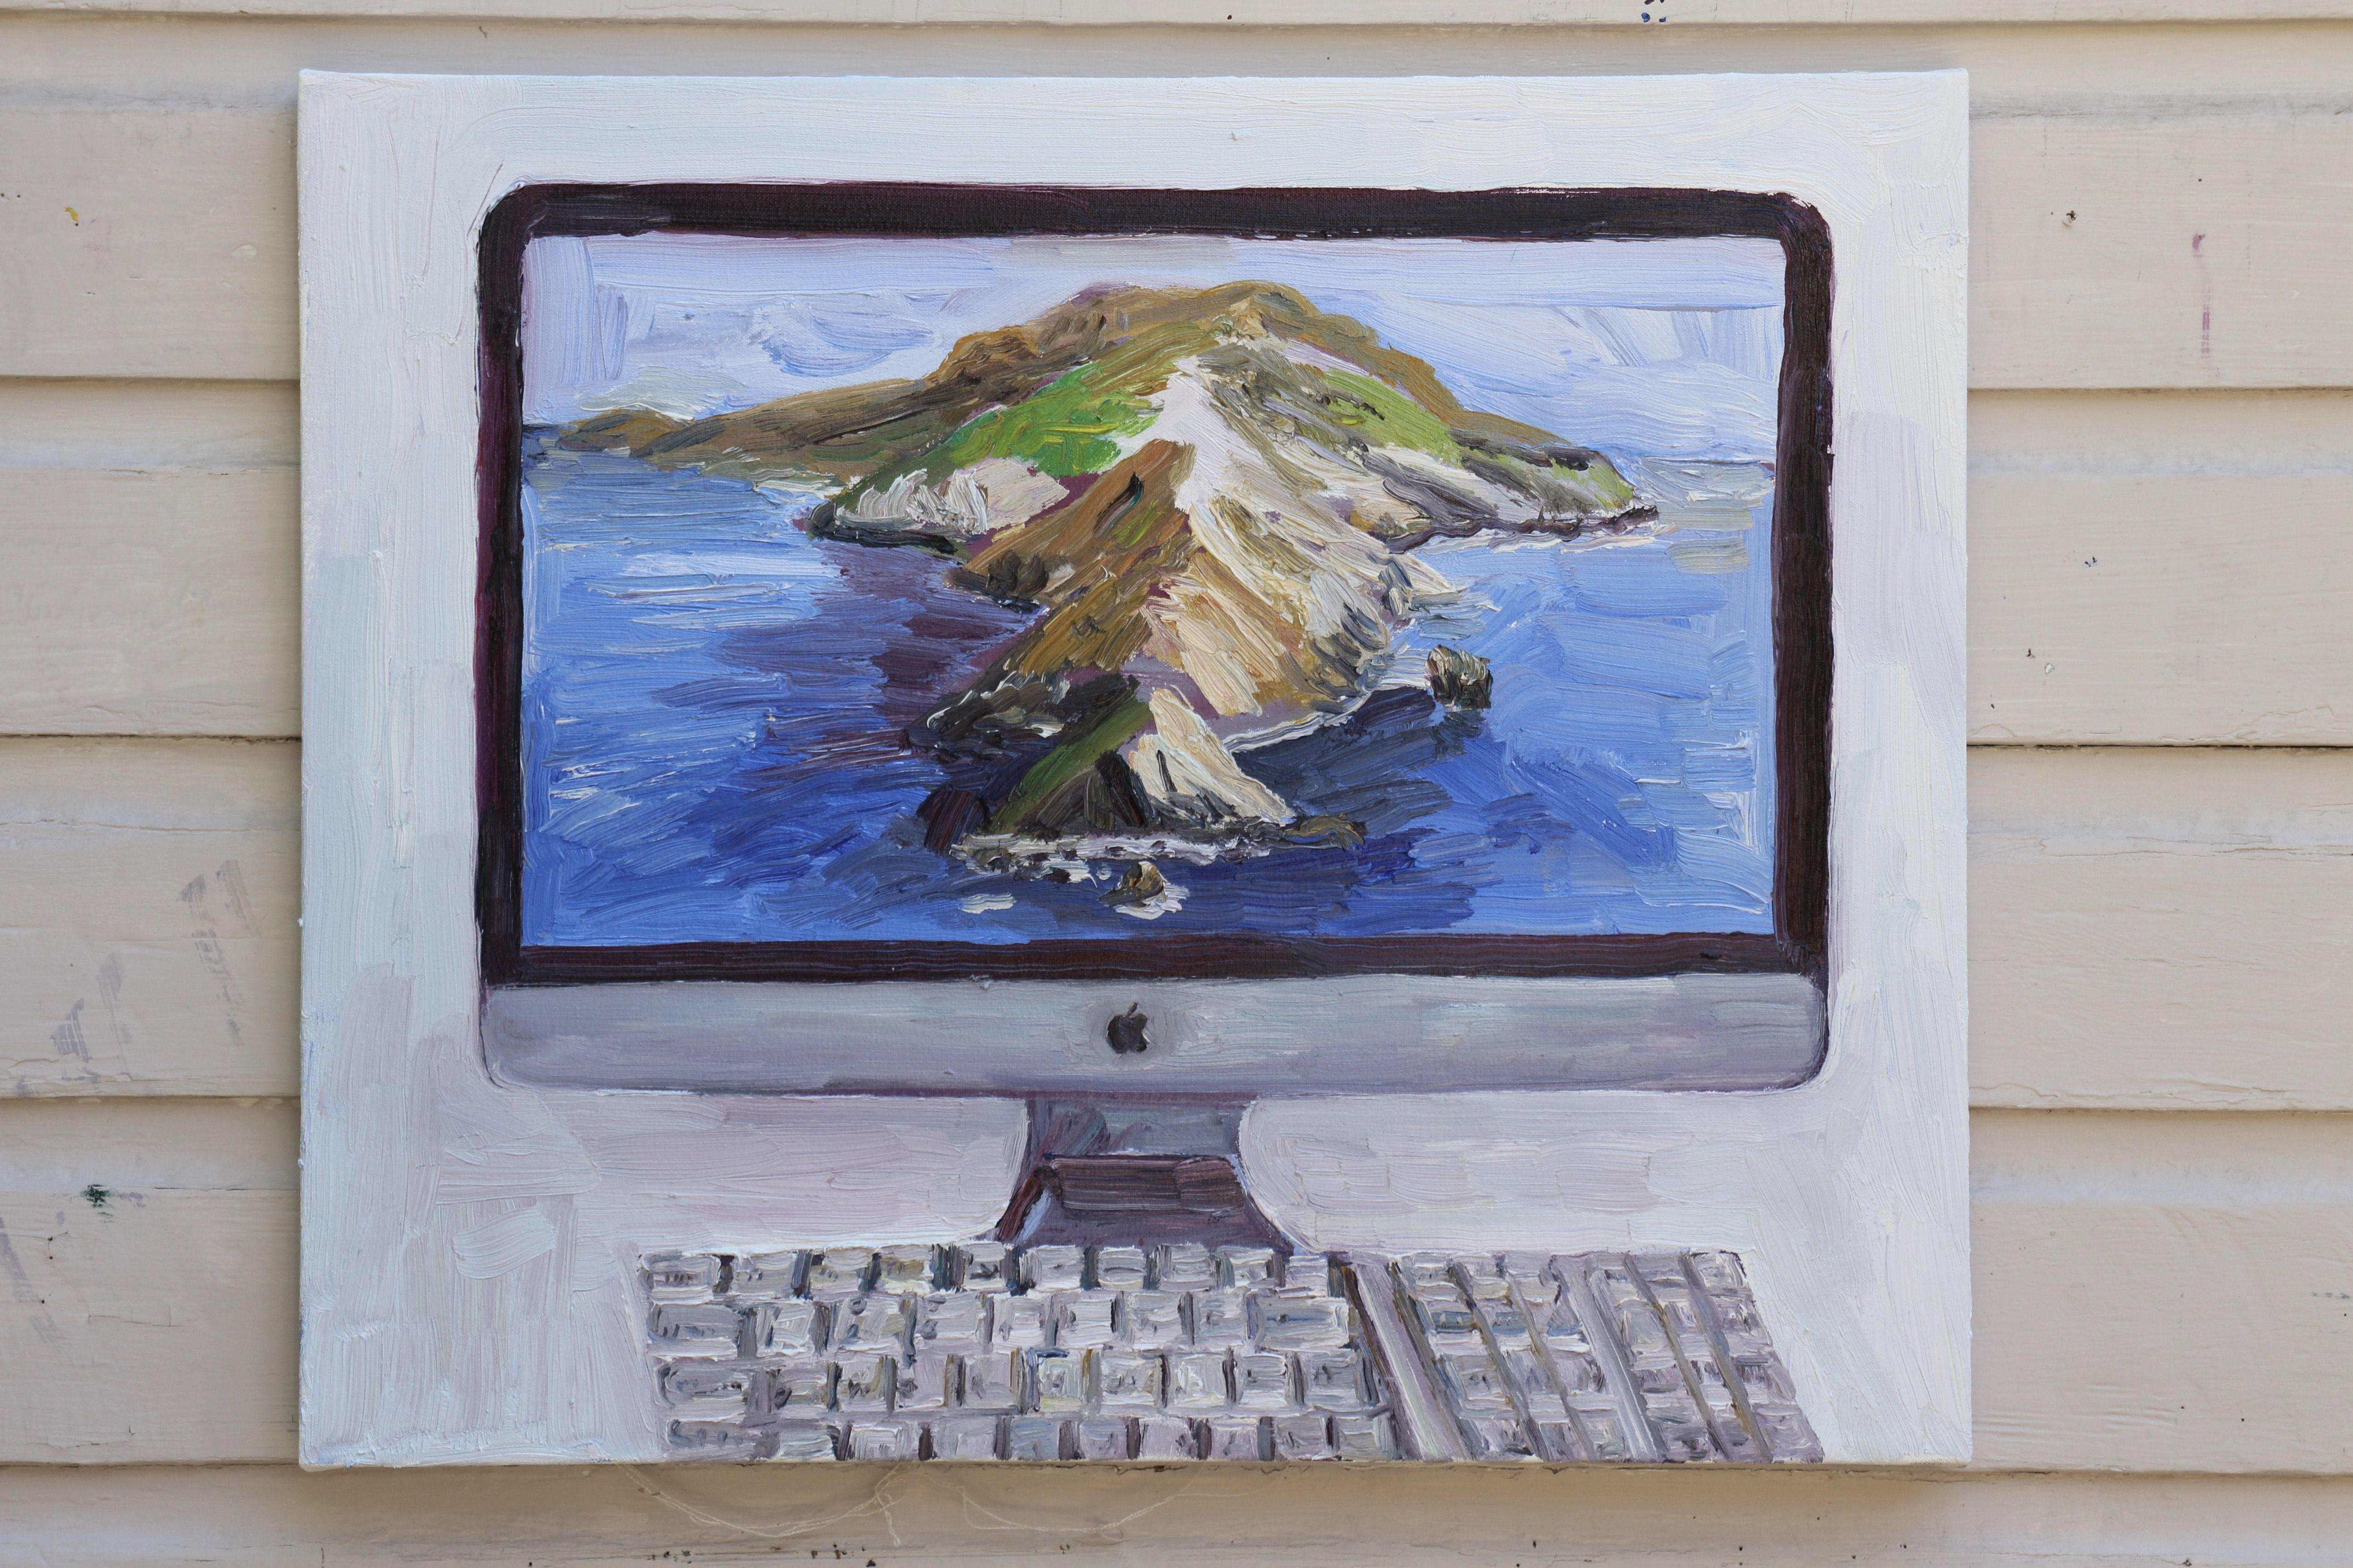 Still life oil painting of an iMac computer with Catalina Island on the screen.     For the price on a new iMac...You can buy a painting of an iMac instead. Also, the painting will most likely not loose it's value over time like a computer does.  